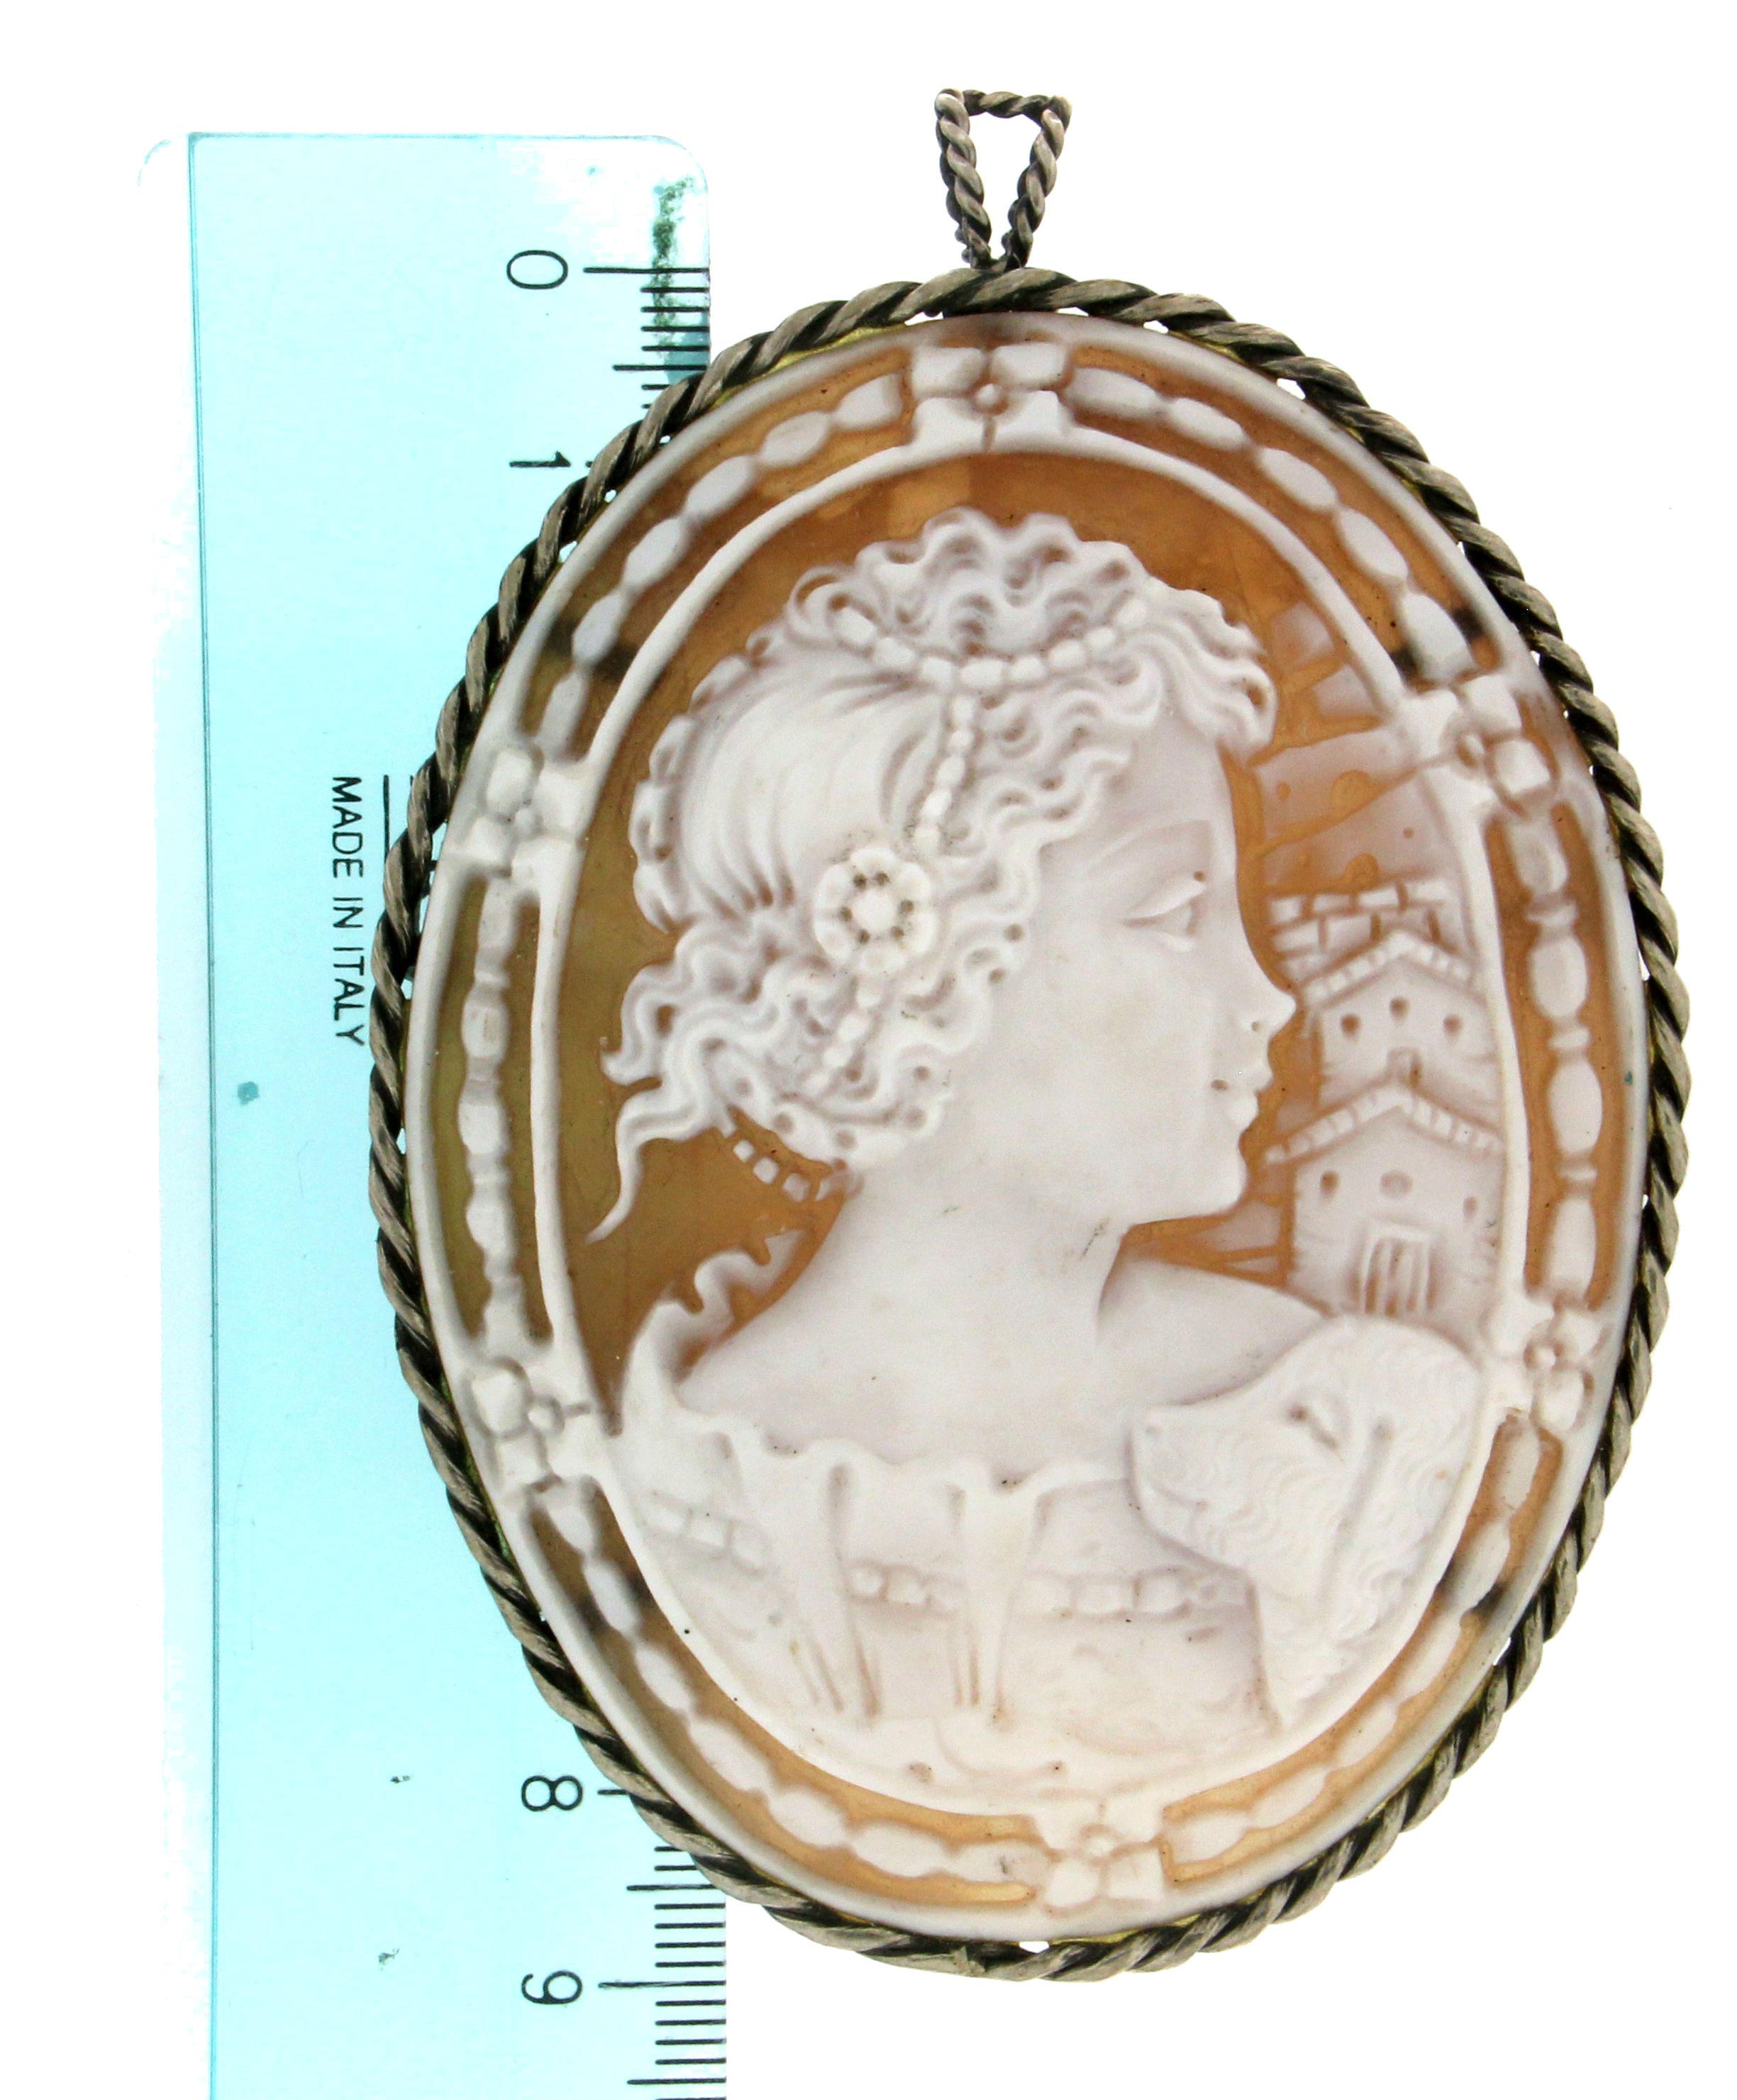 Artisan Handcraft Cameo 800 Thousandths Silver Brooch and Pendant Necklace For Sale